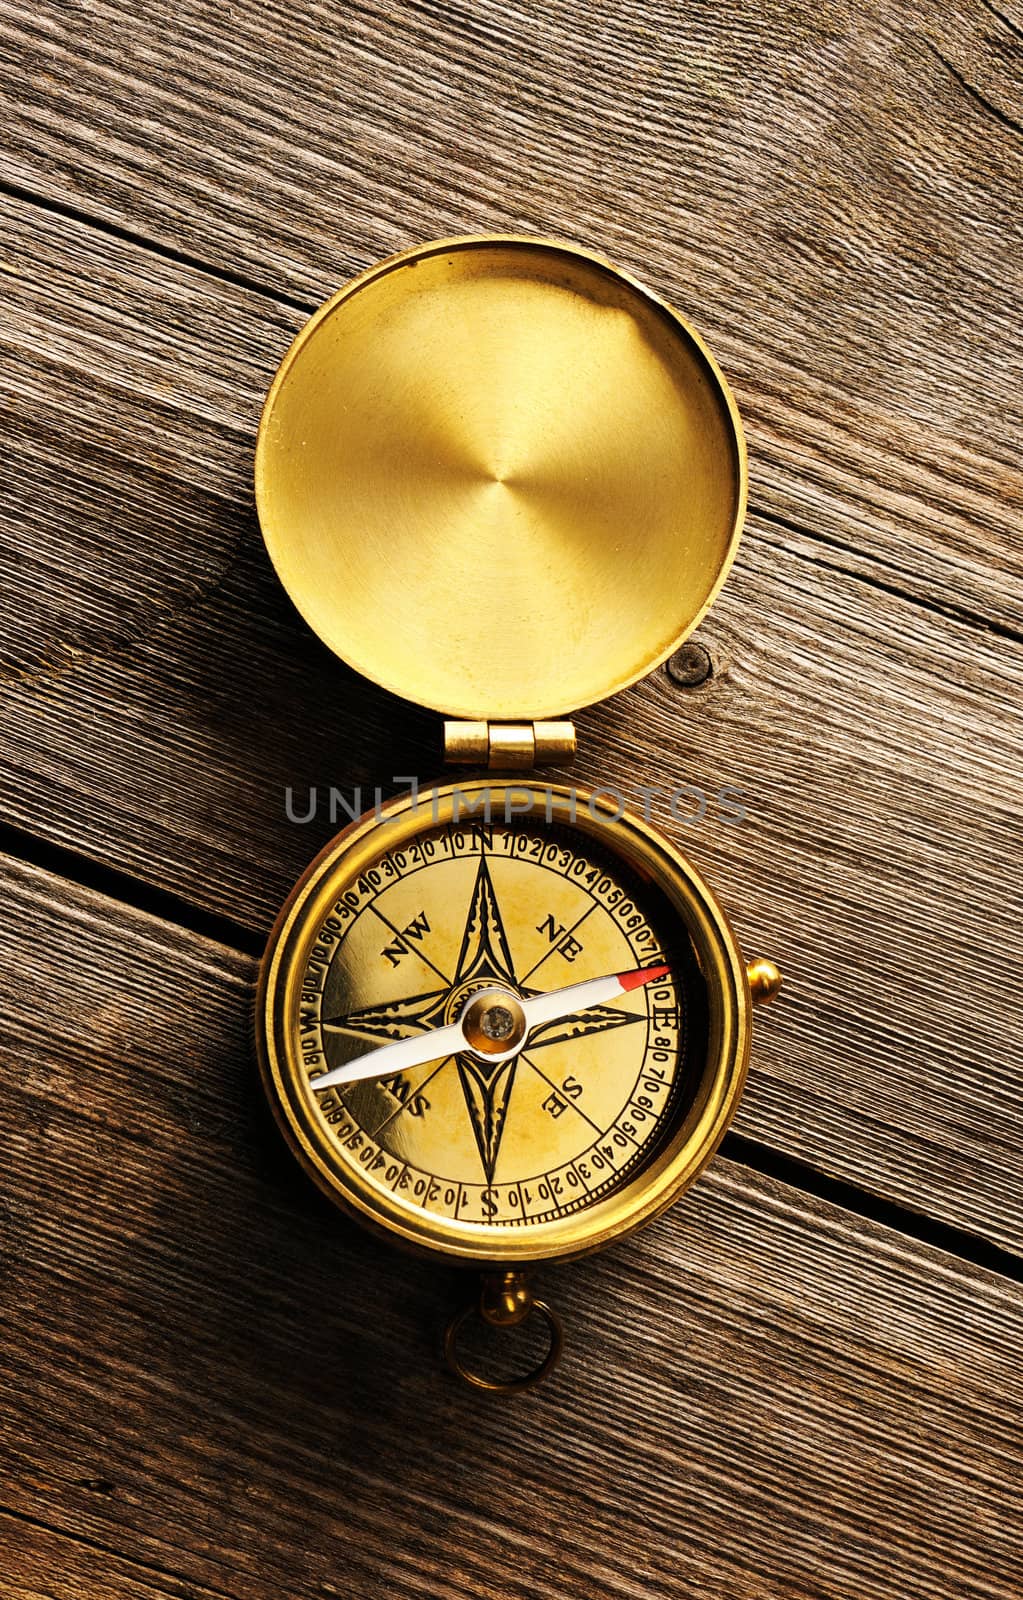 Antique compass over wooden background by haveseen